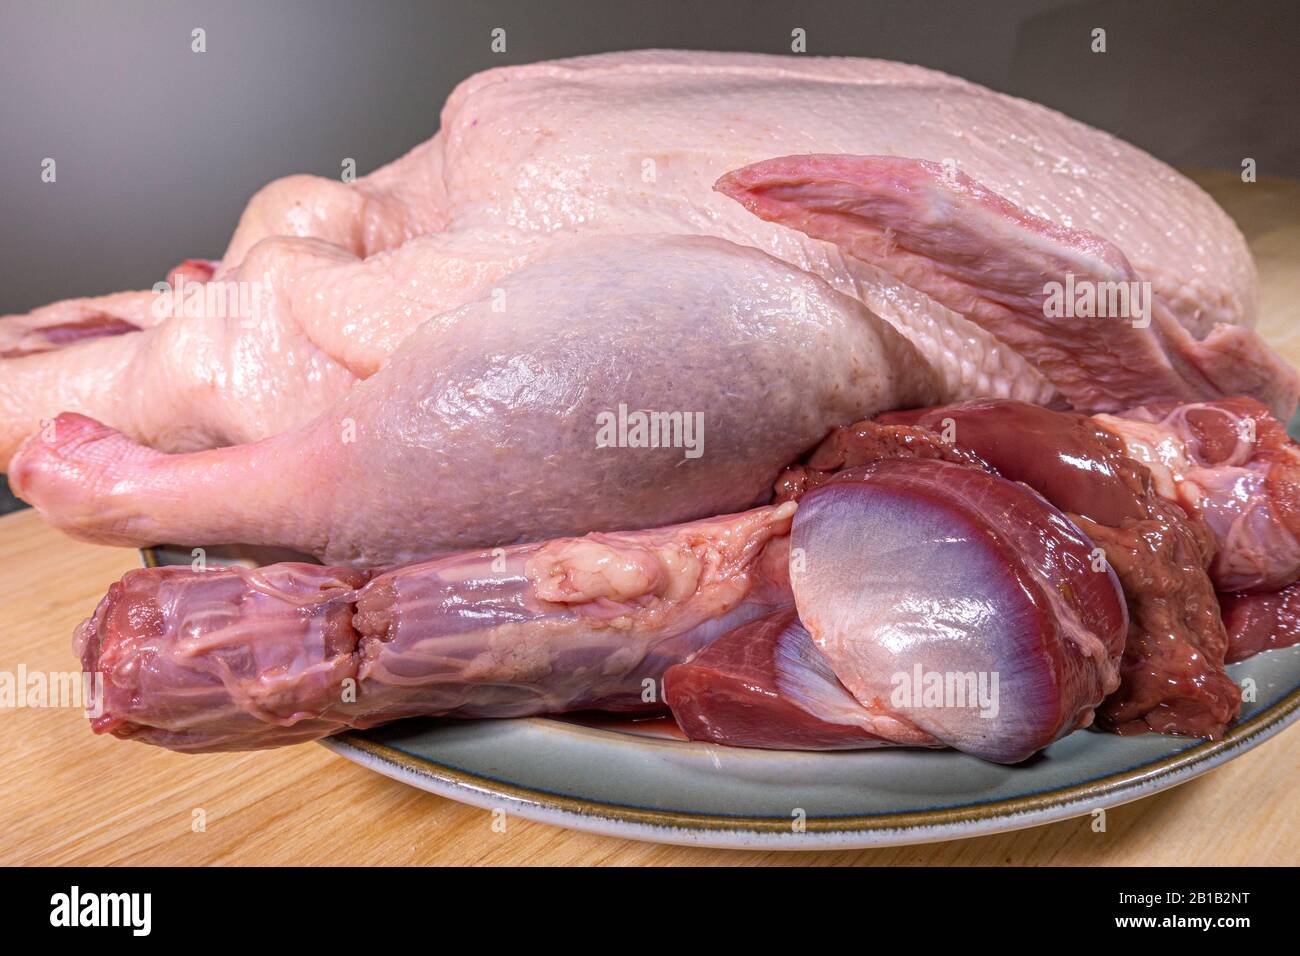 A whole raw / uncooked duck with giblets resting on a plate prior to cooking. Stock Photo